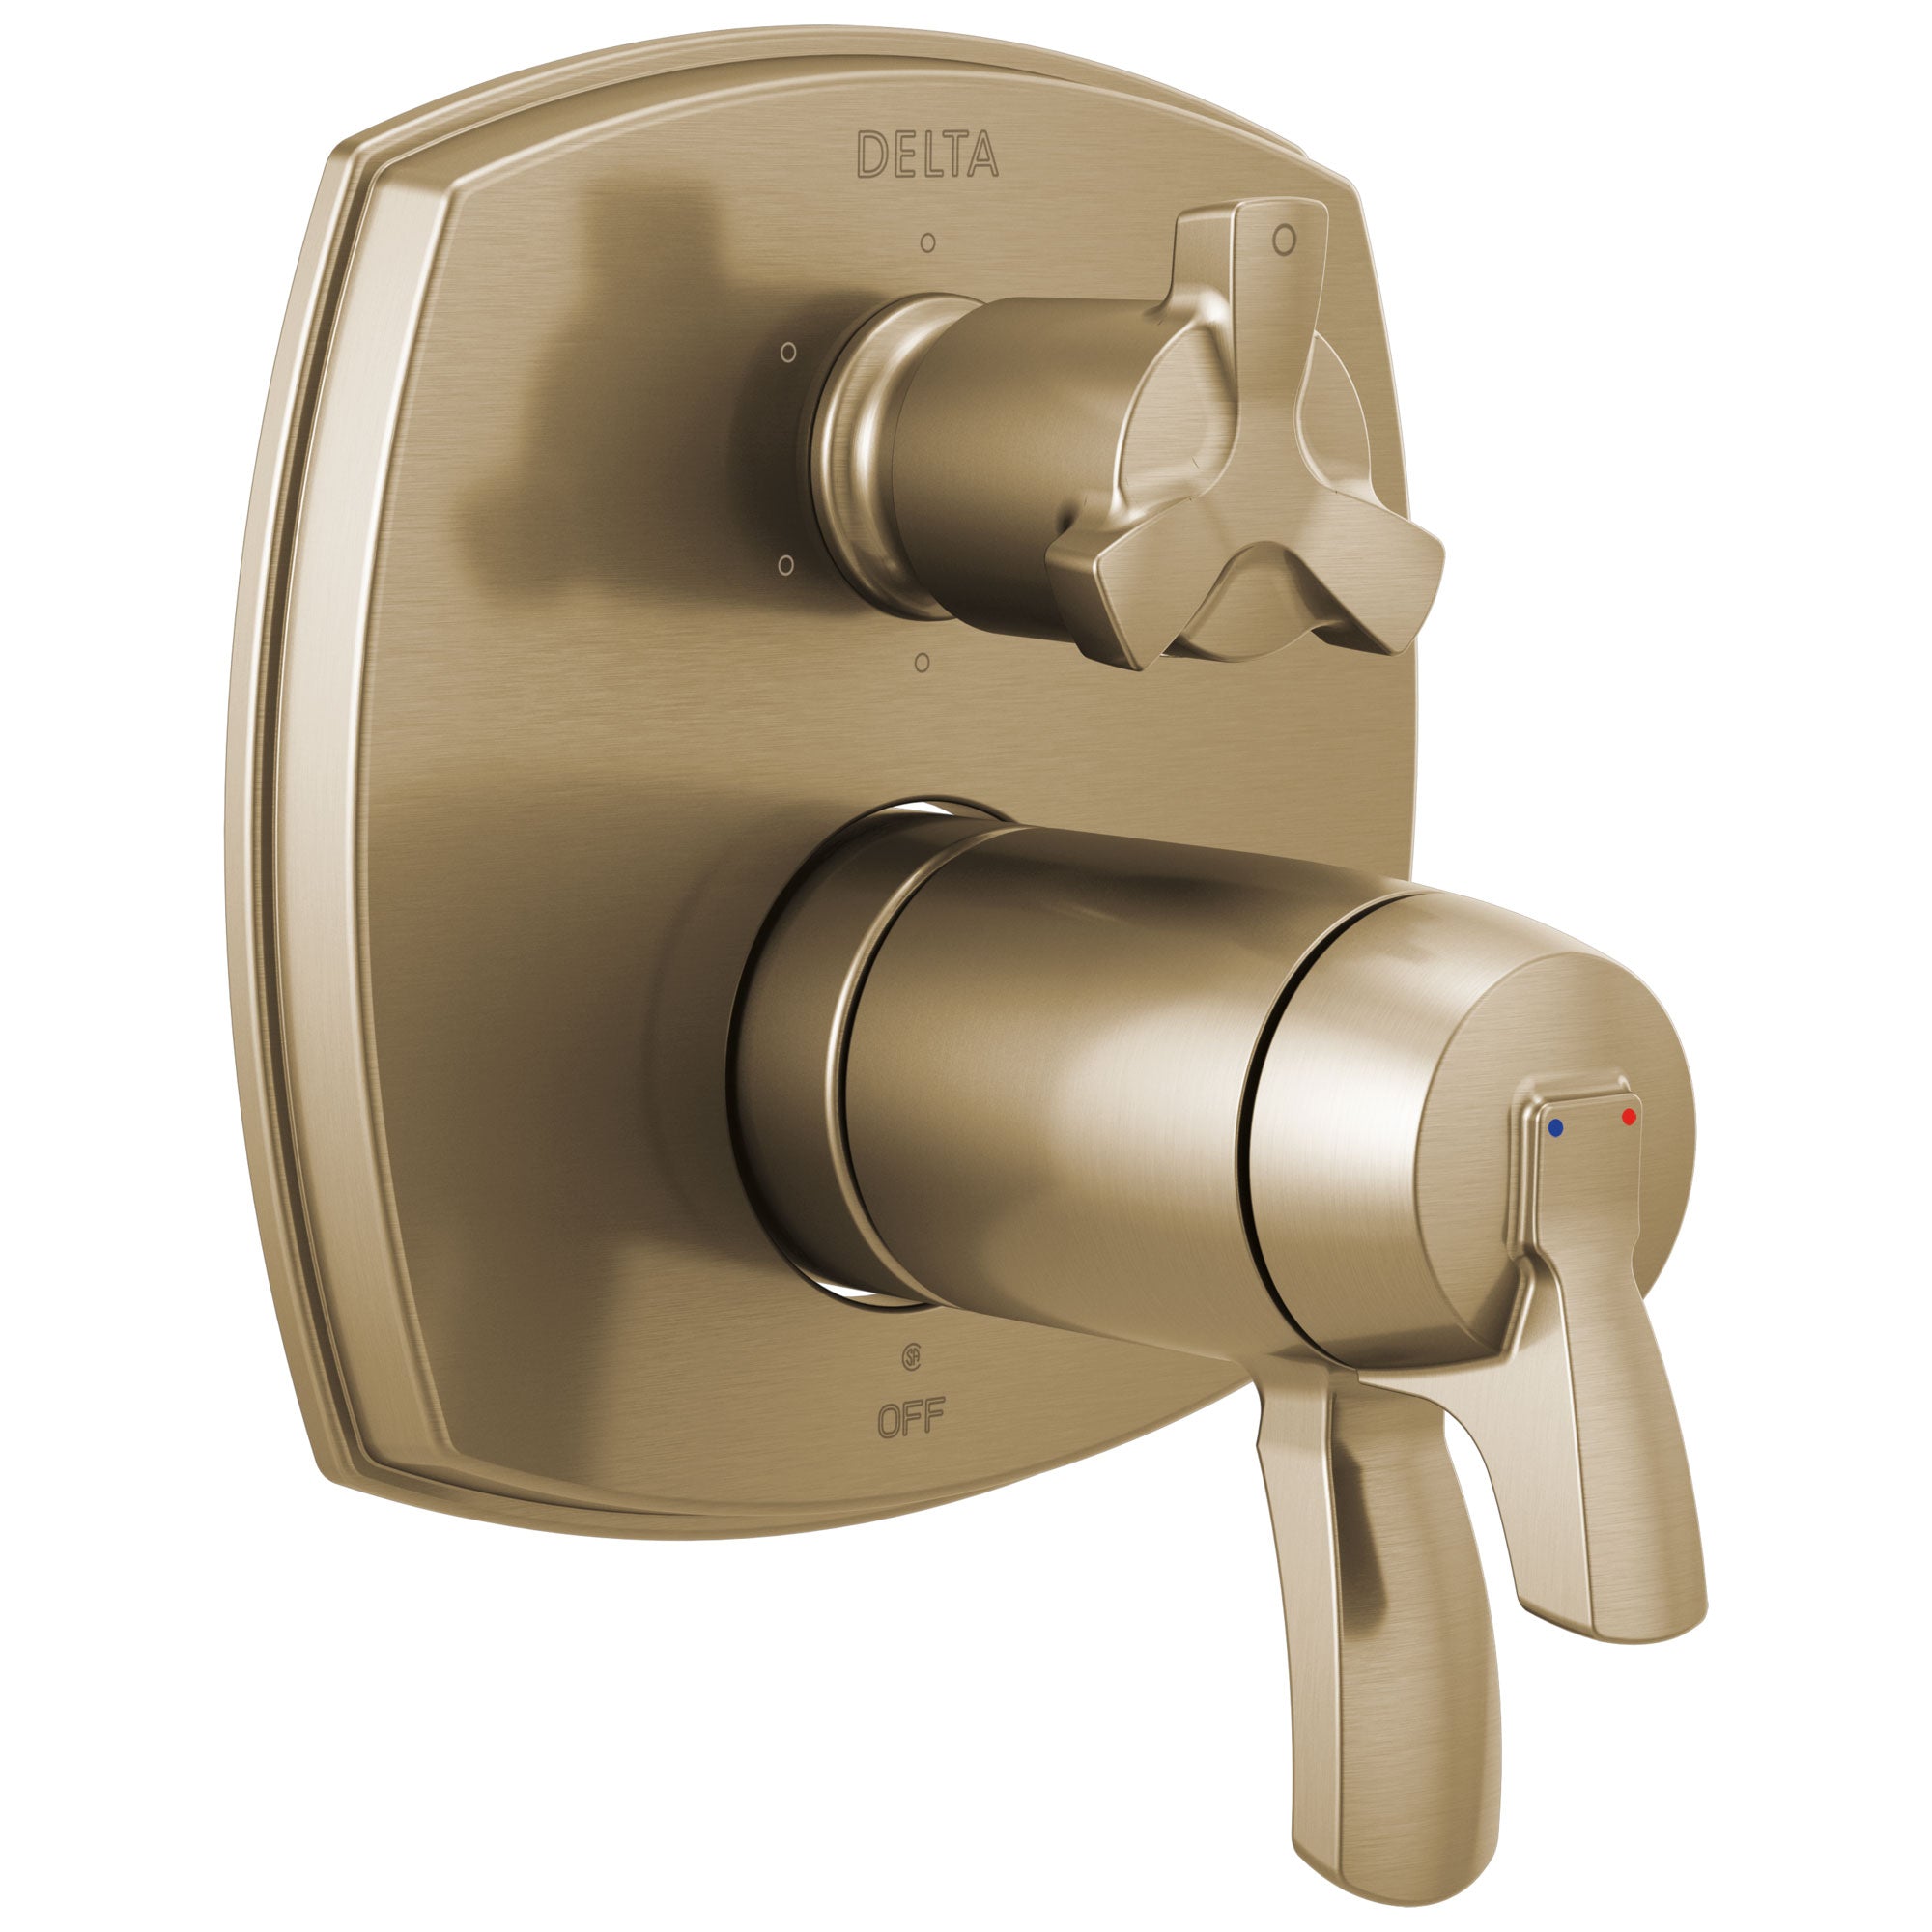 Delta Stryke Champagne Bronze Thermostatic Shower System Control with 6 Setting Integrated Cross Handle Diverter Includes Valve & Handles D3080V